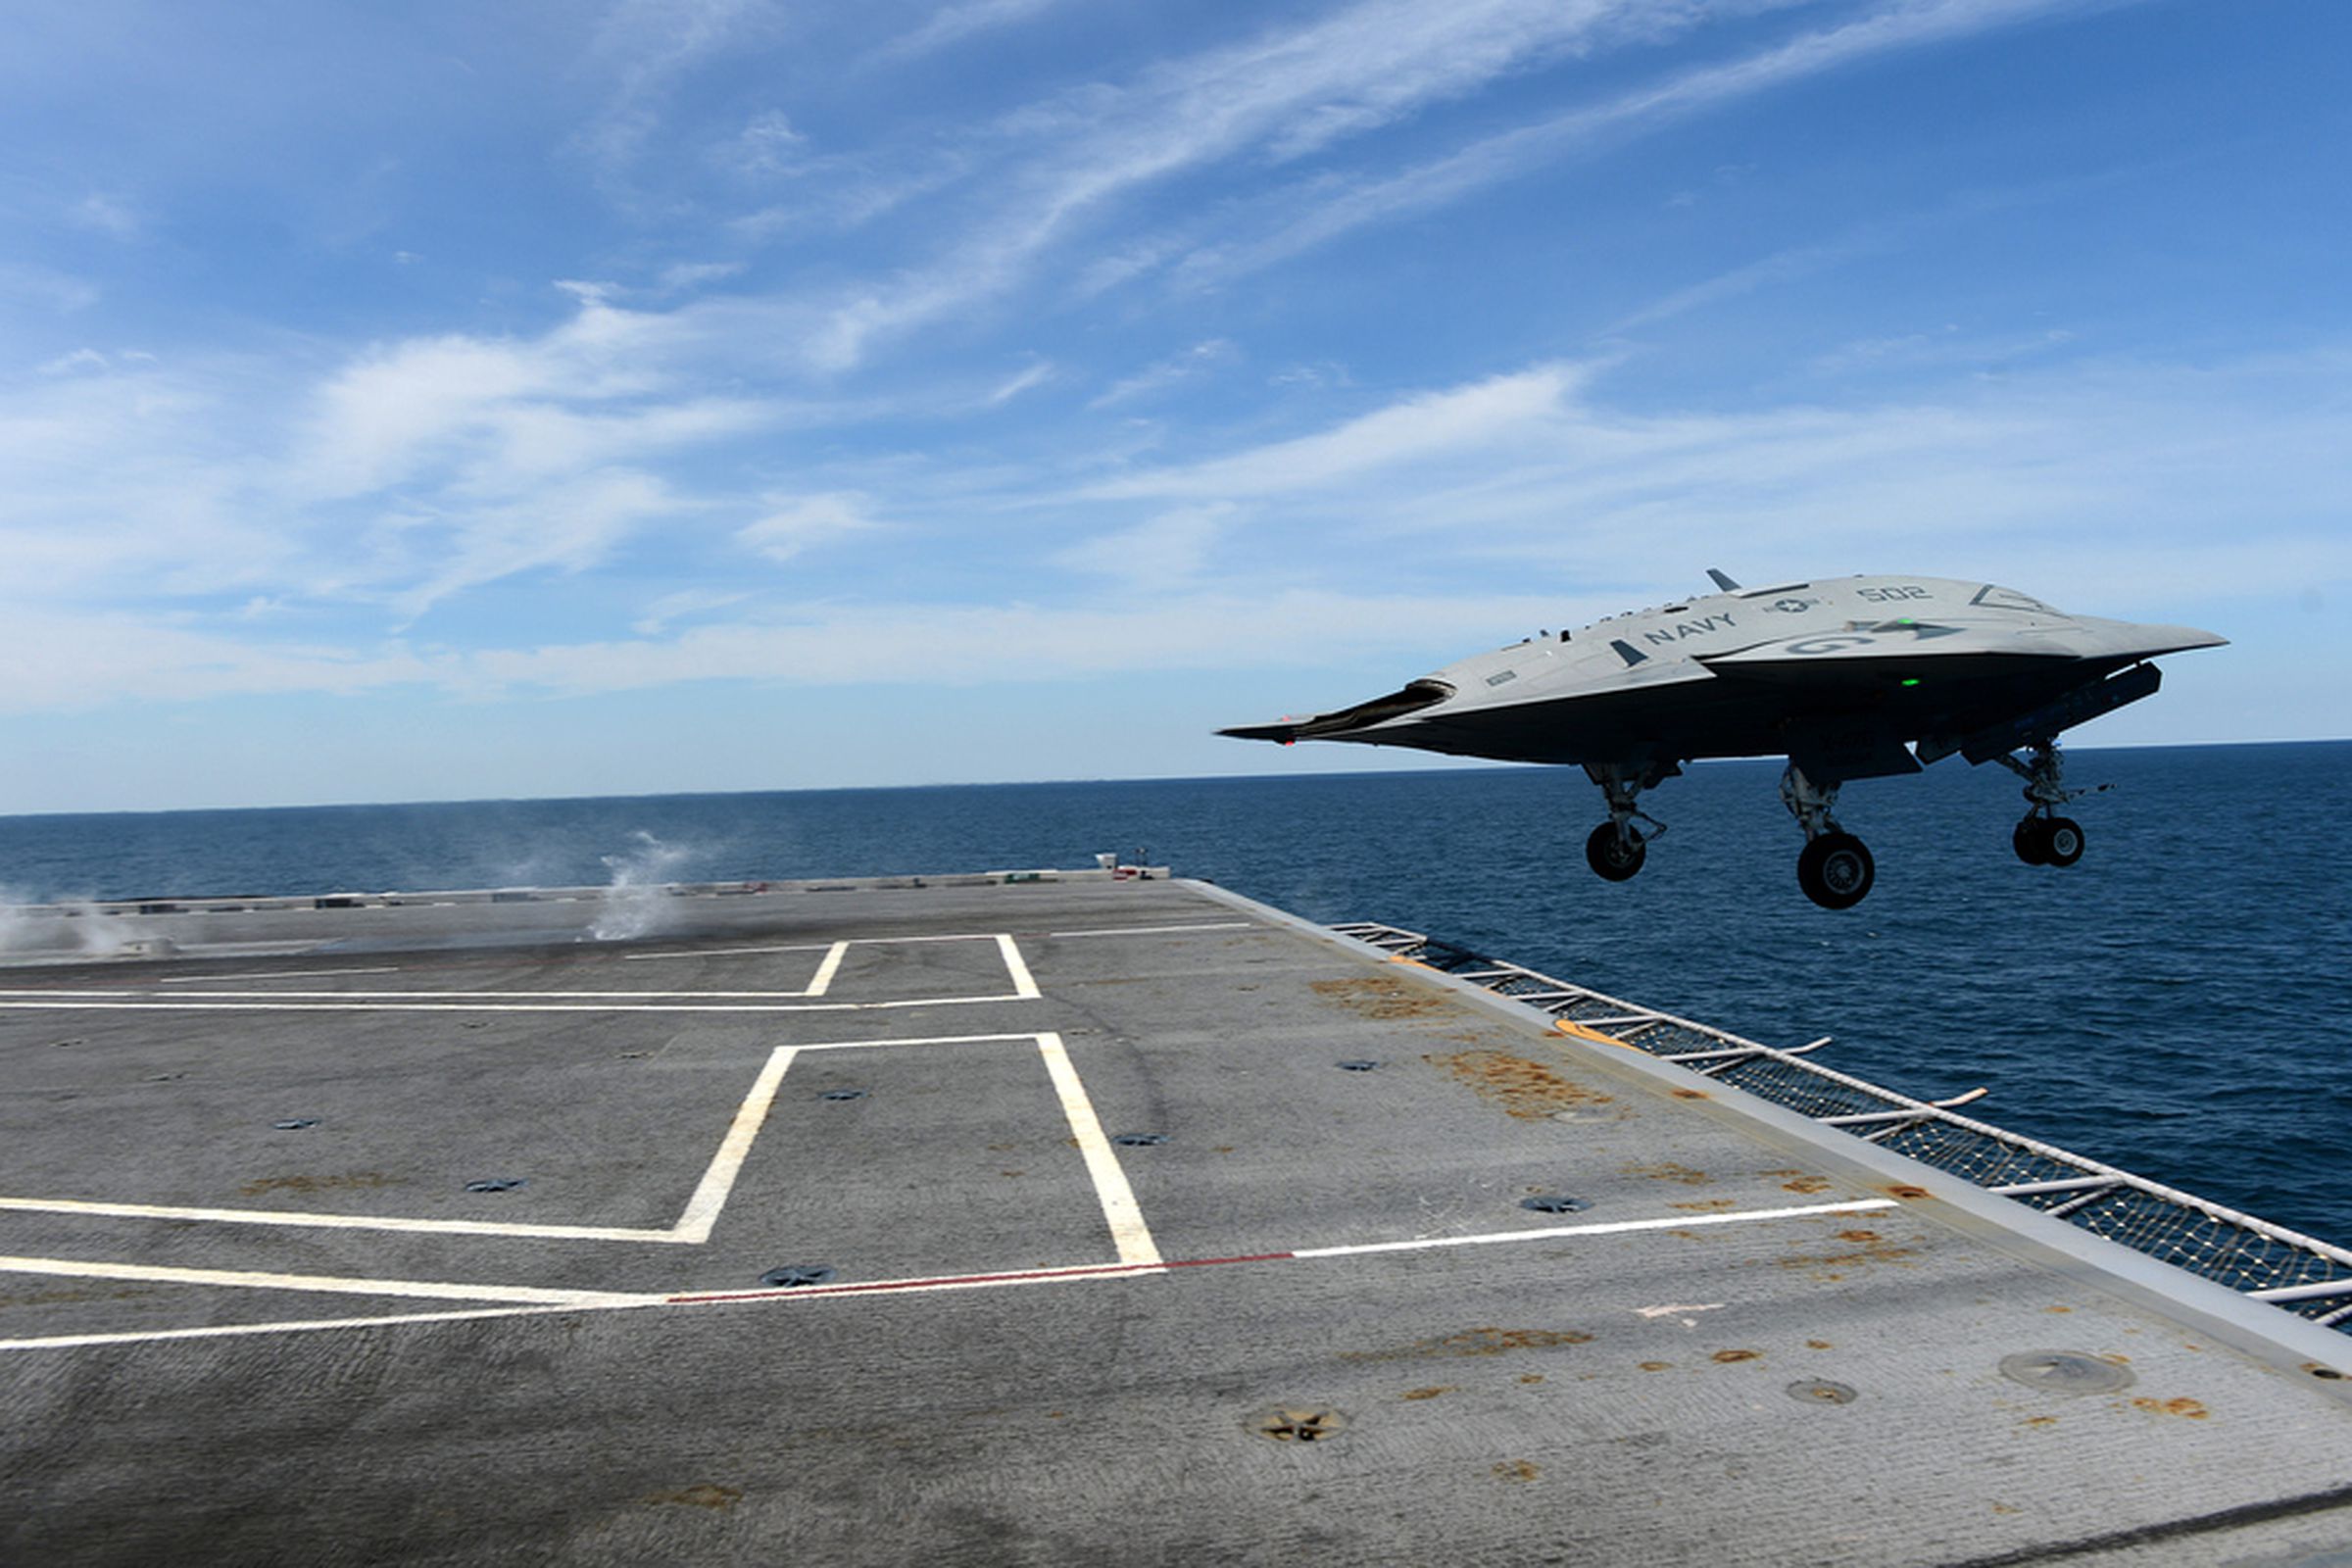 Navy X-47B drone takes off from aircraft carrier